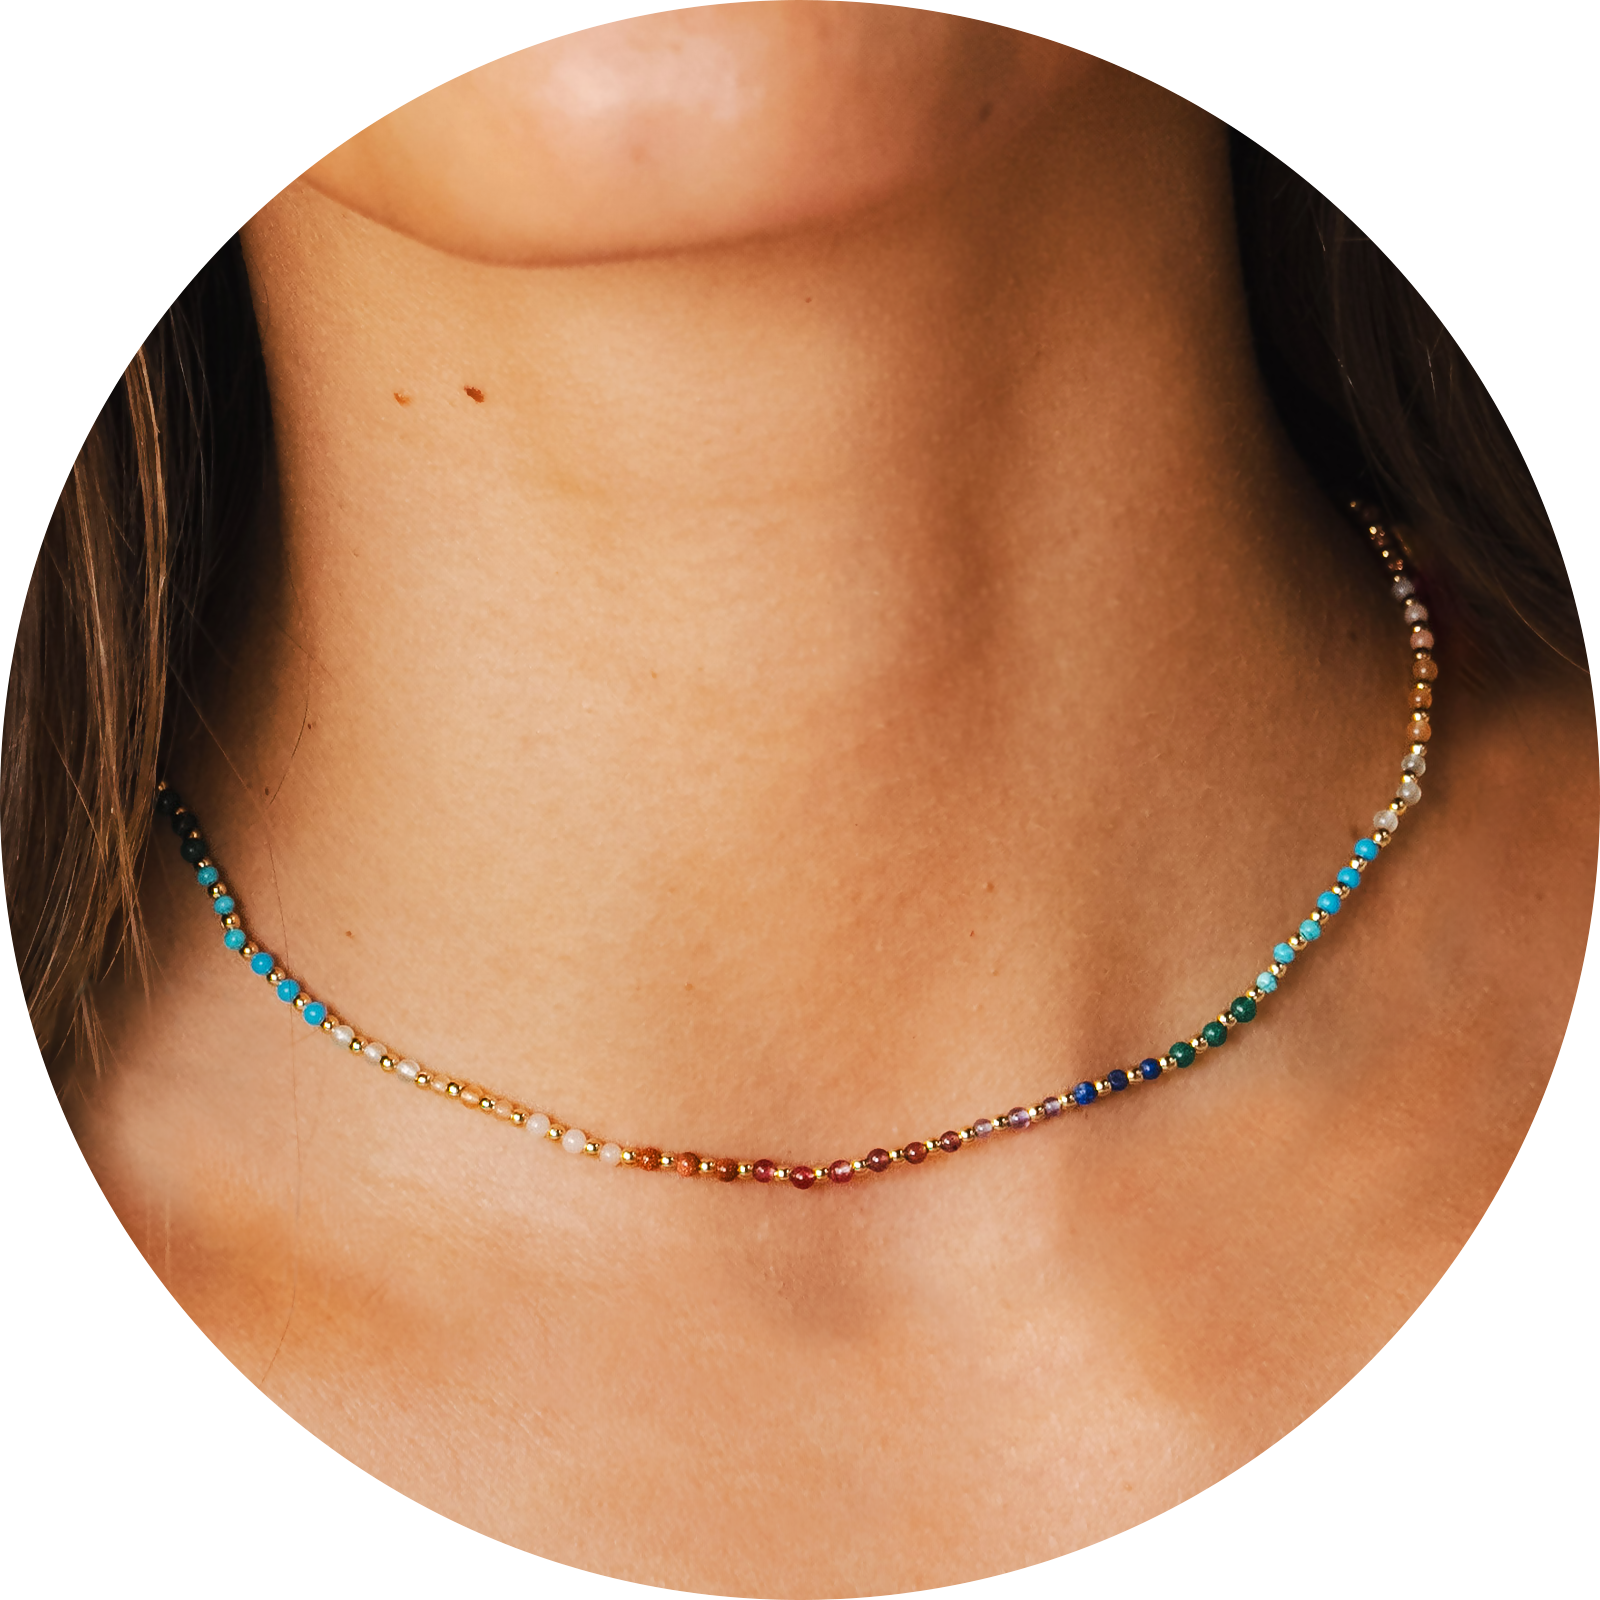 Model wearing a 2mm multicolor stone and gold bead healing necklace